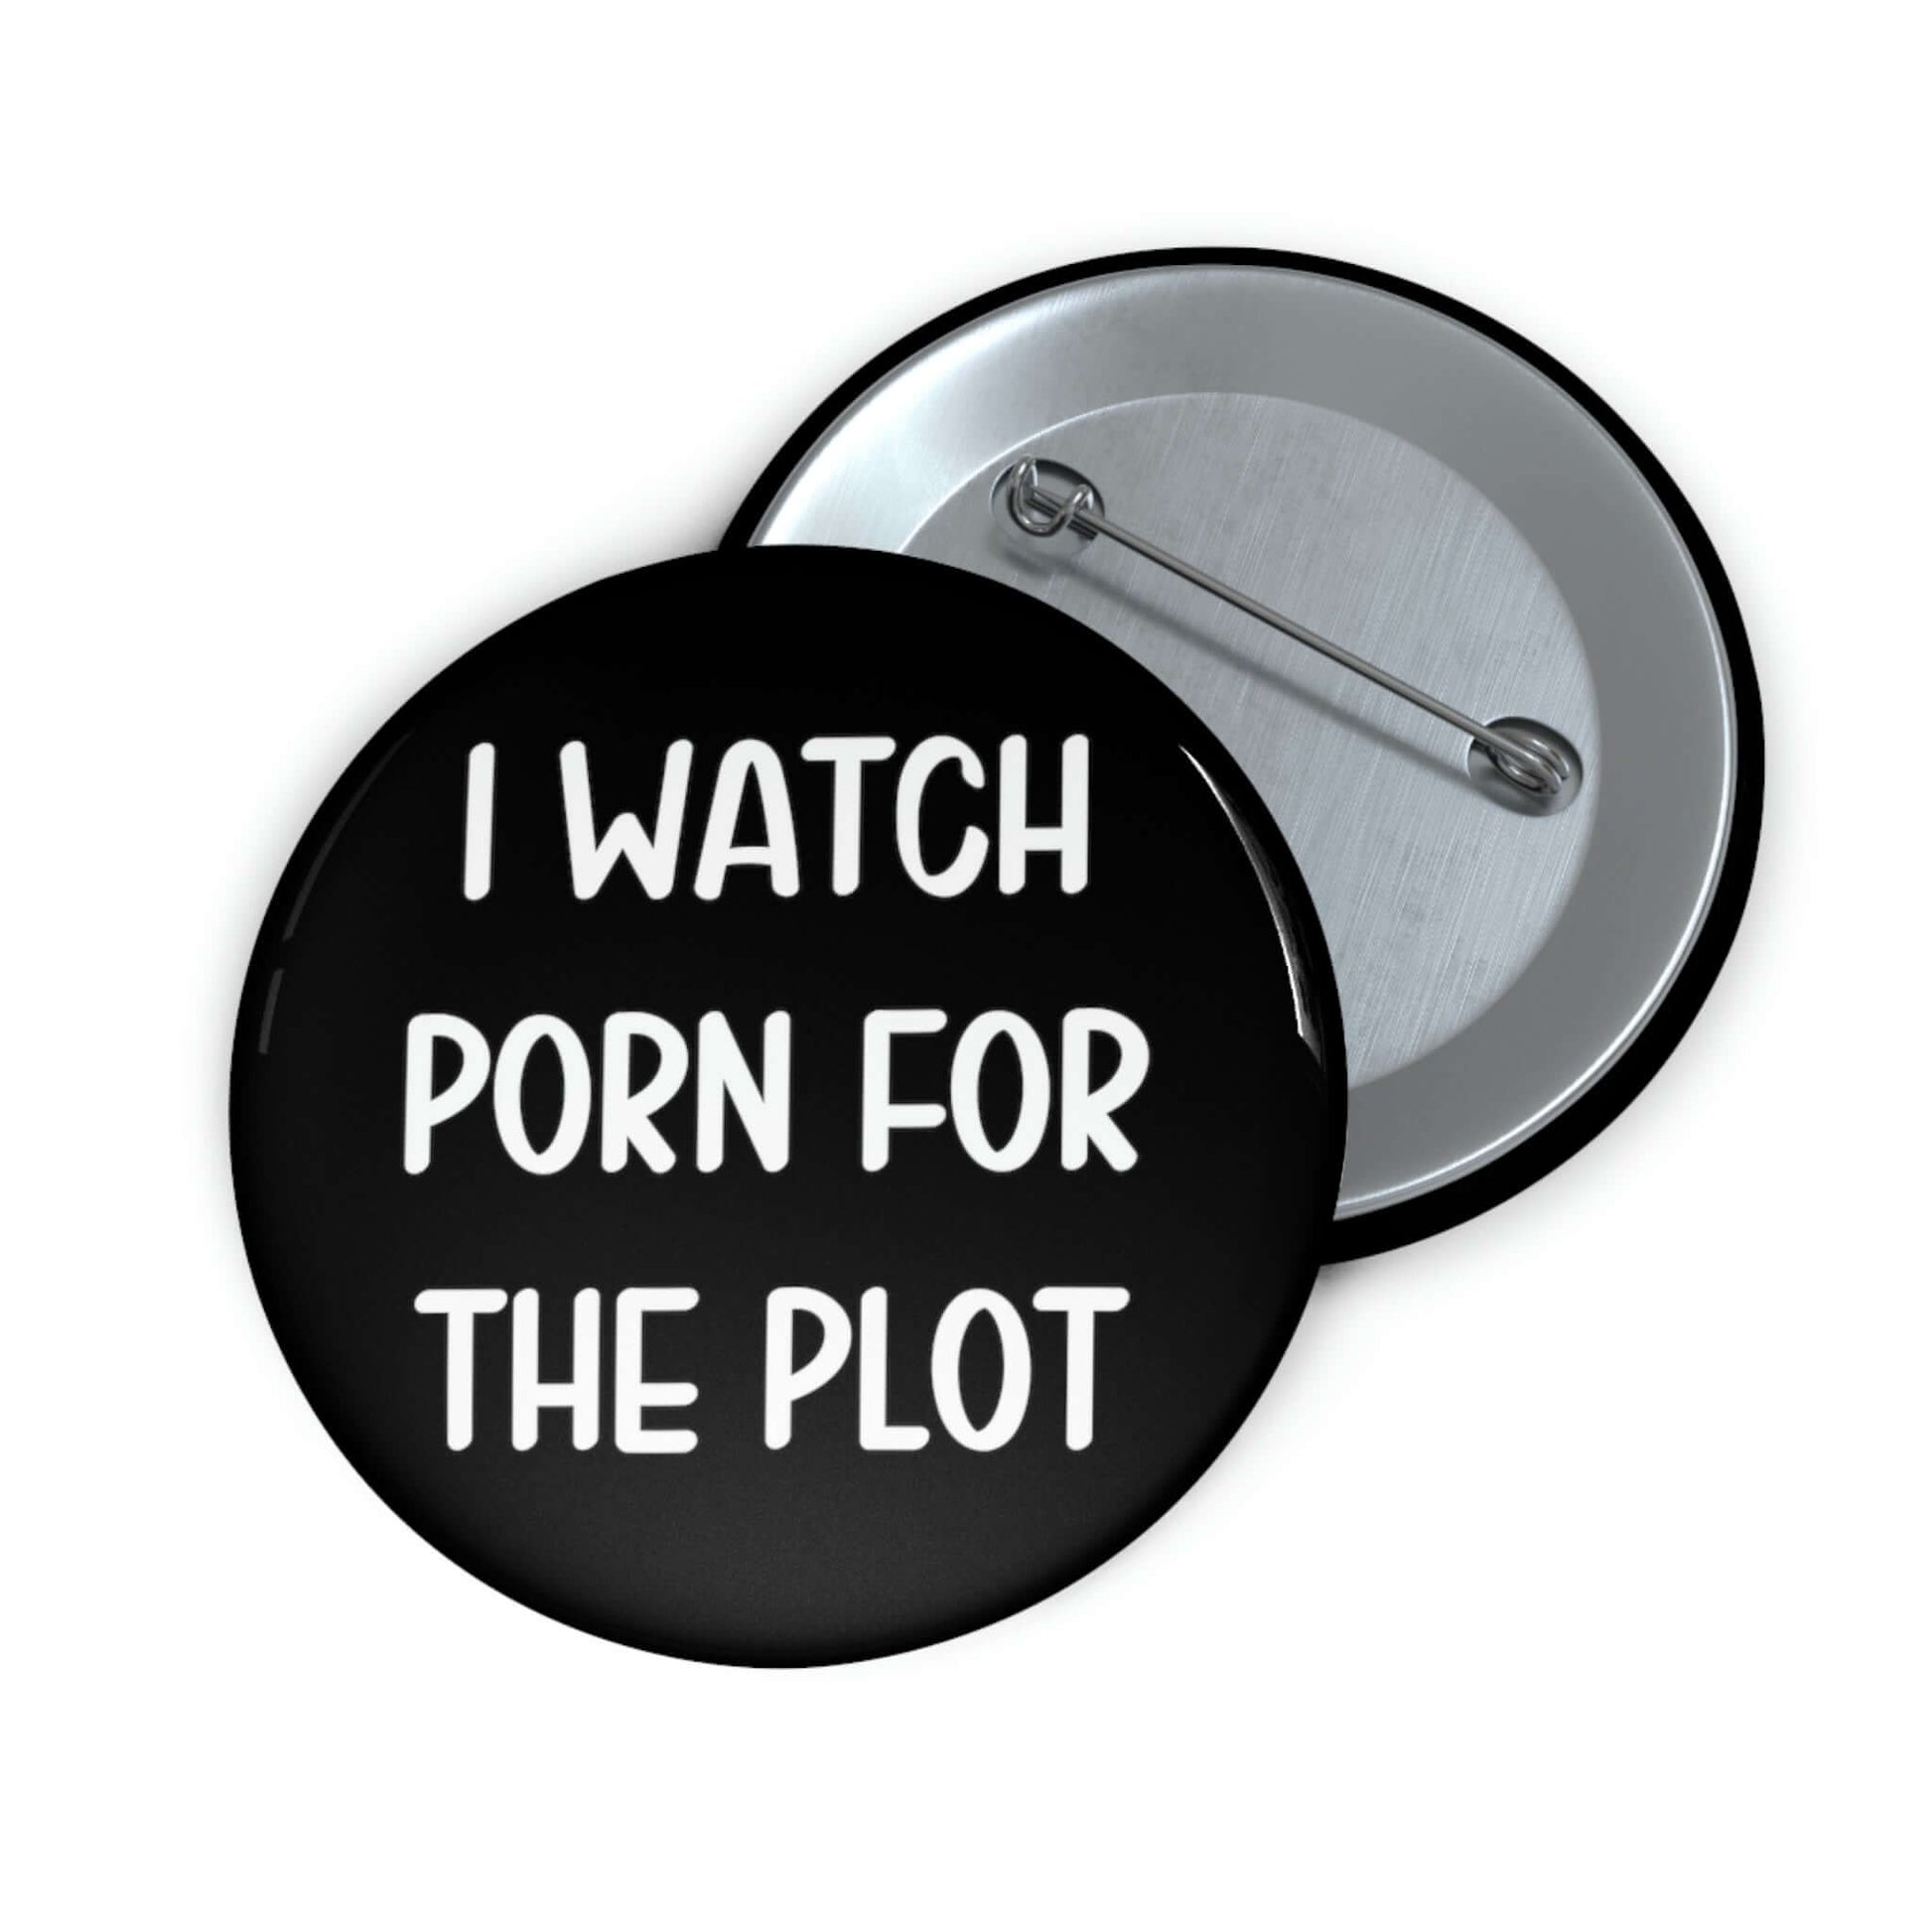 Pinback button that says I watch porn for the plot.